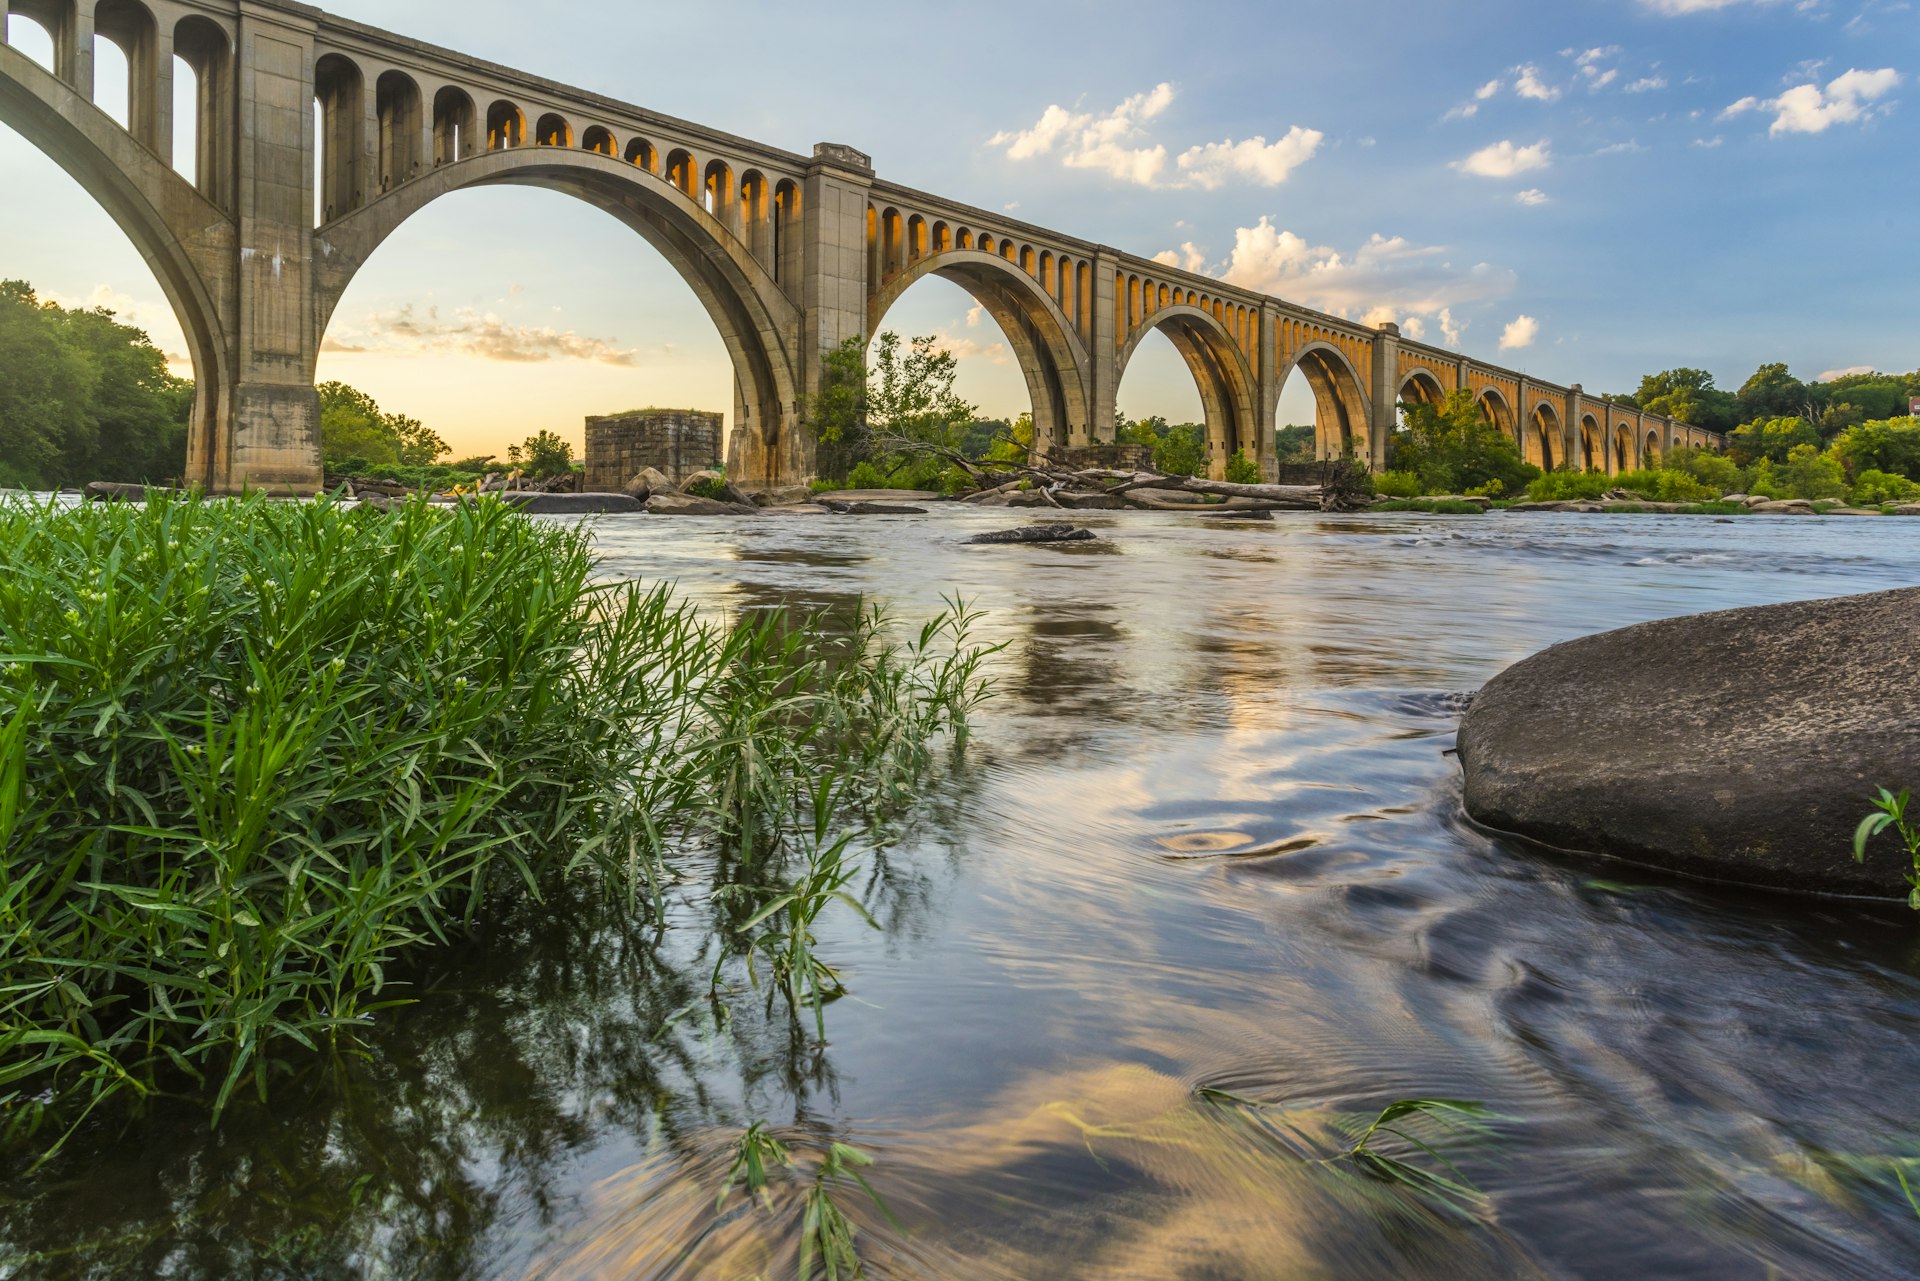 A concrete arch railroad bridge spanning the James River was built by the Atlantic Coast Line, Fredericksburg and Potomac Railroad in 1919 to route transportation of freight around Richmond, Virginia